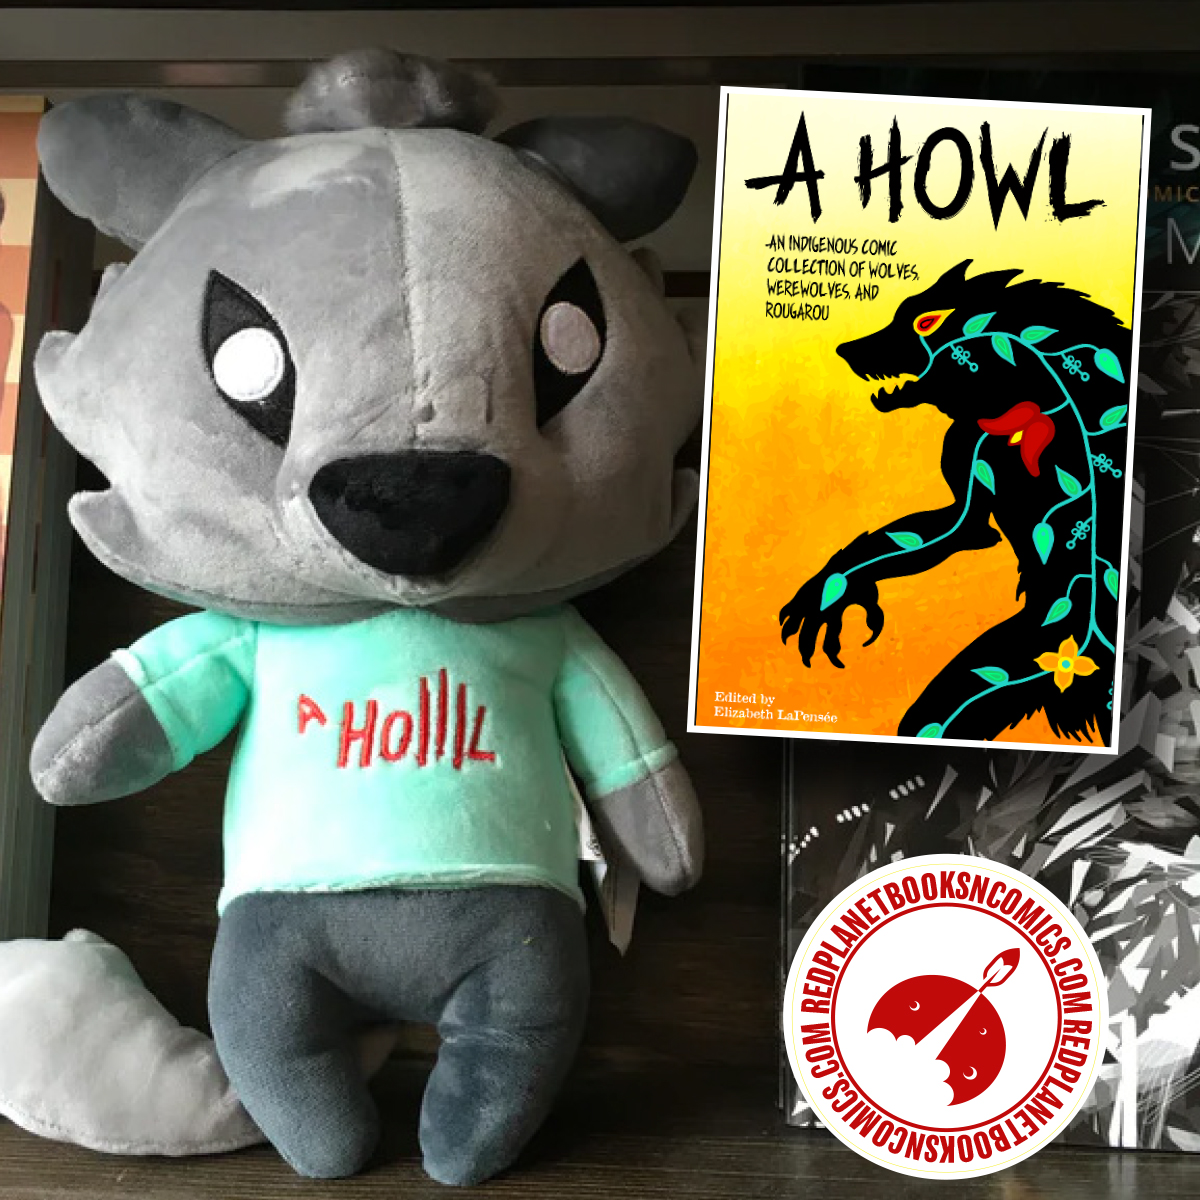 A HOWL: An Indigenous Anthology of Wolves, Werewolves, and Rougarou” has been a huge hit. But there’s more than the book! We have A Howl T-shirts, plushies & stickers & they’re going fast! ➡ redplanetbooksncomics.com/blogs/news/get…!

#AHowl #Werewolves #Roguerou #NativeRealities #NativeCreatives